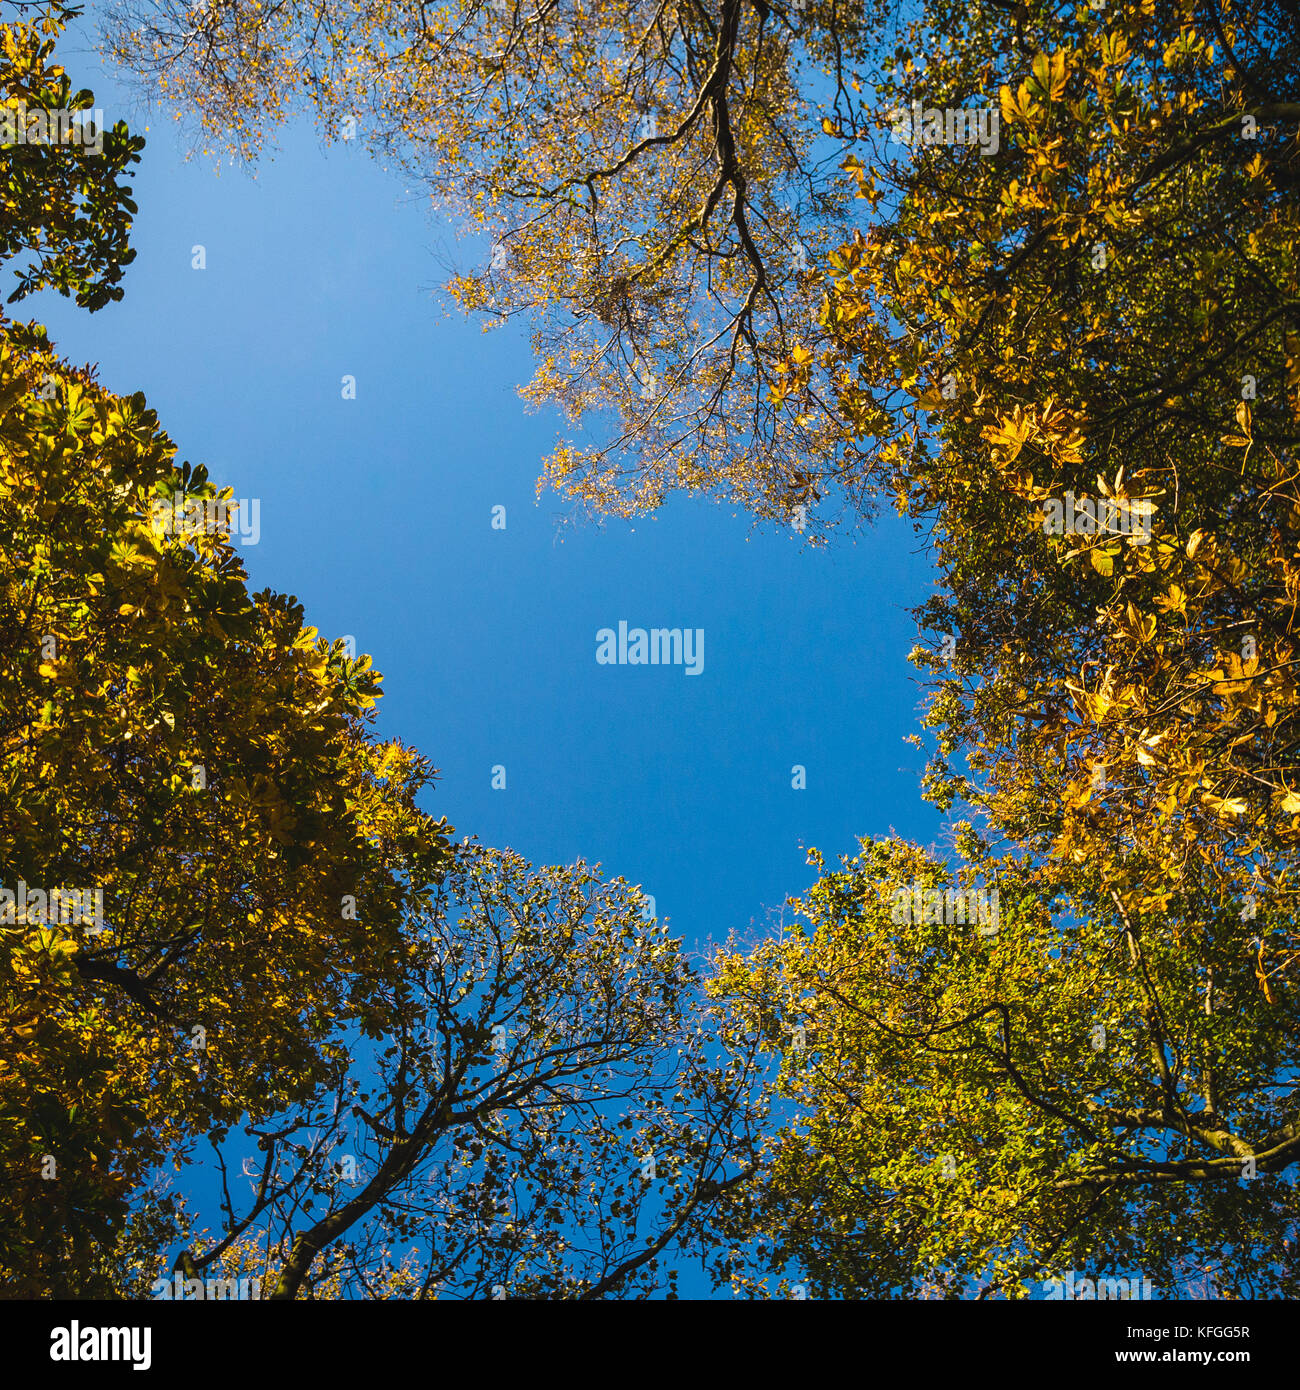 A view up through a canopy of autumn trees to a blue sky. Stock Photo